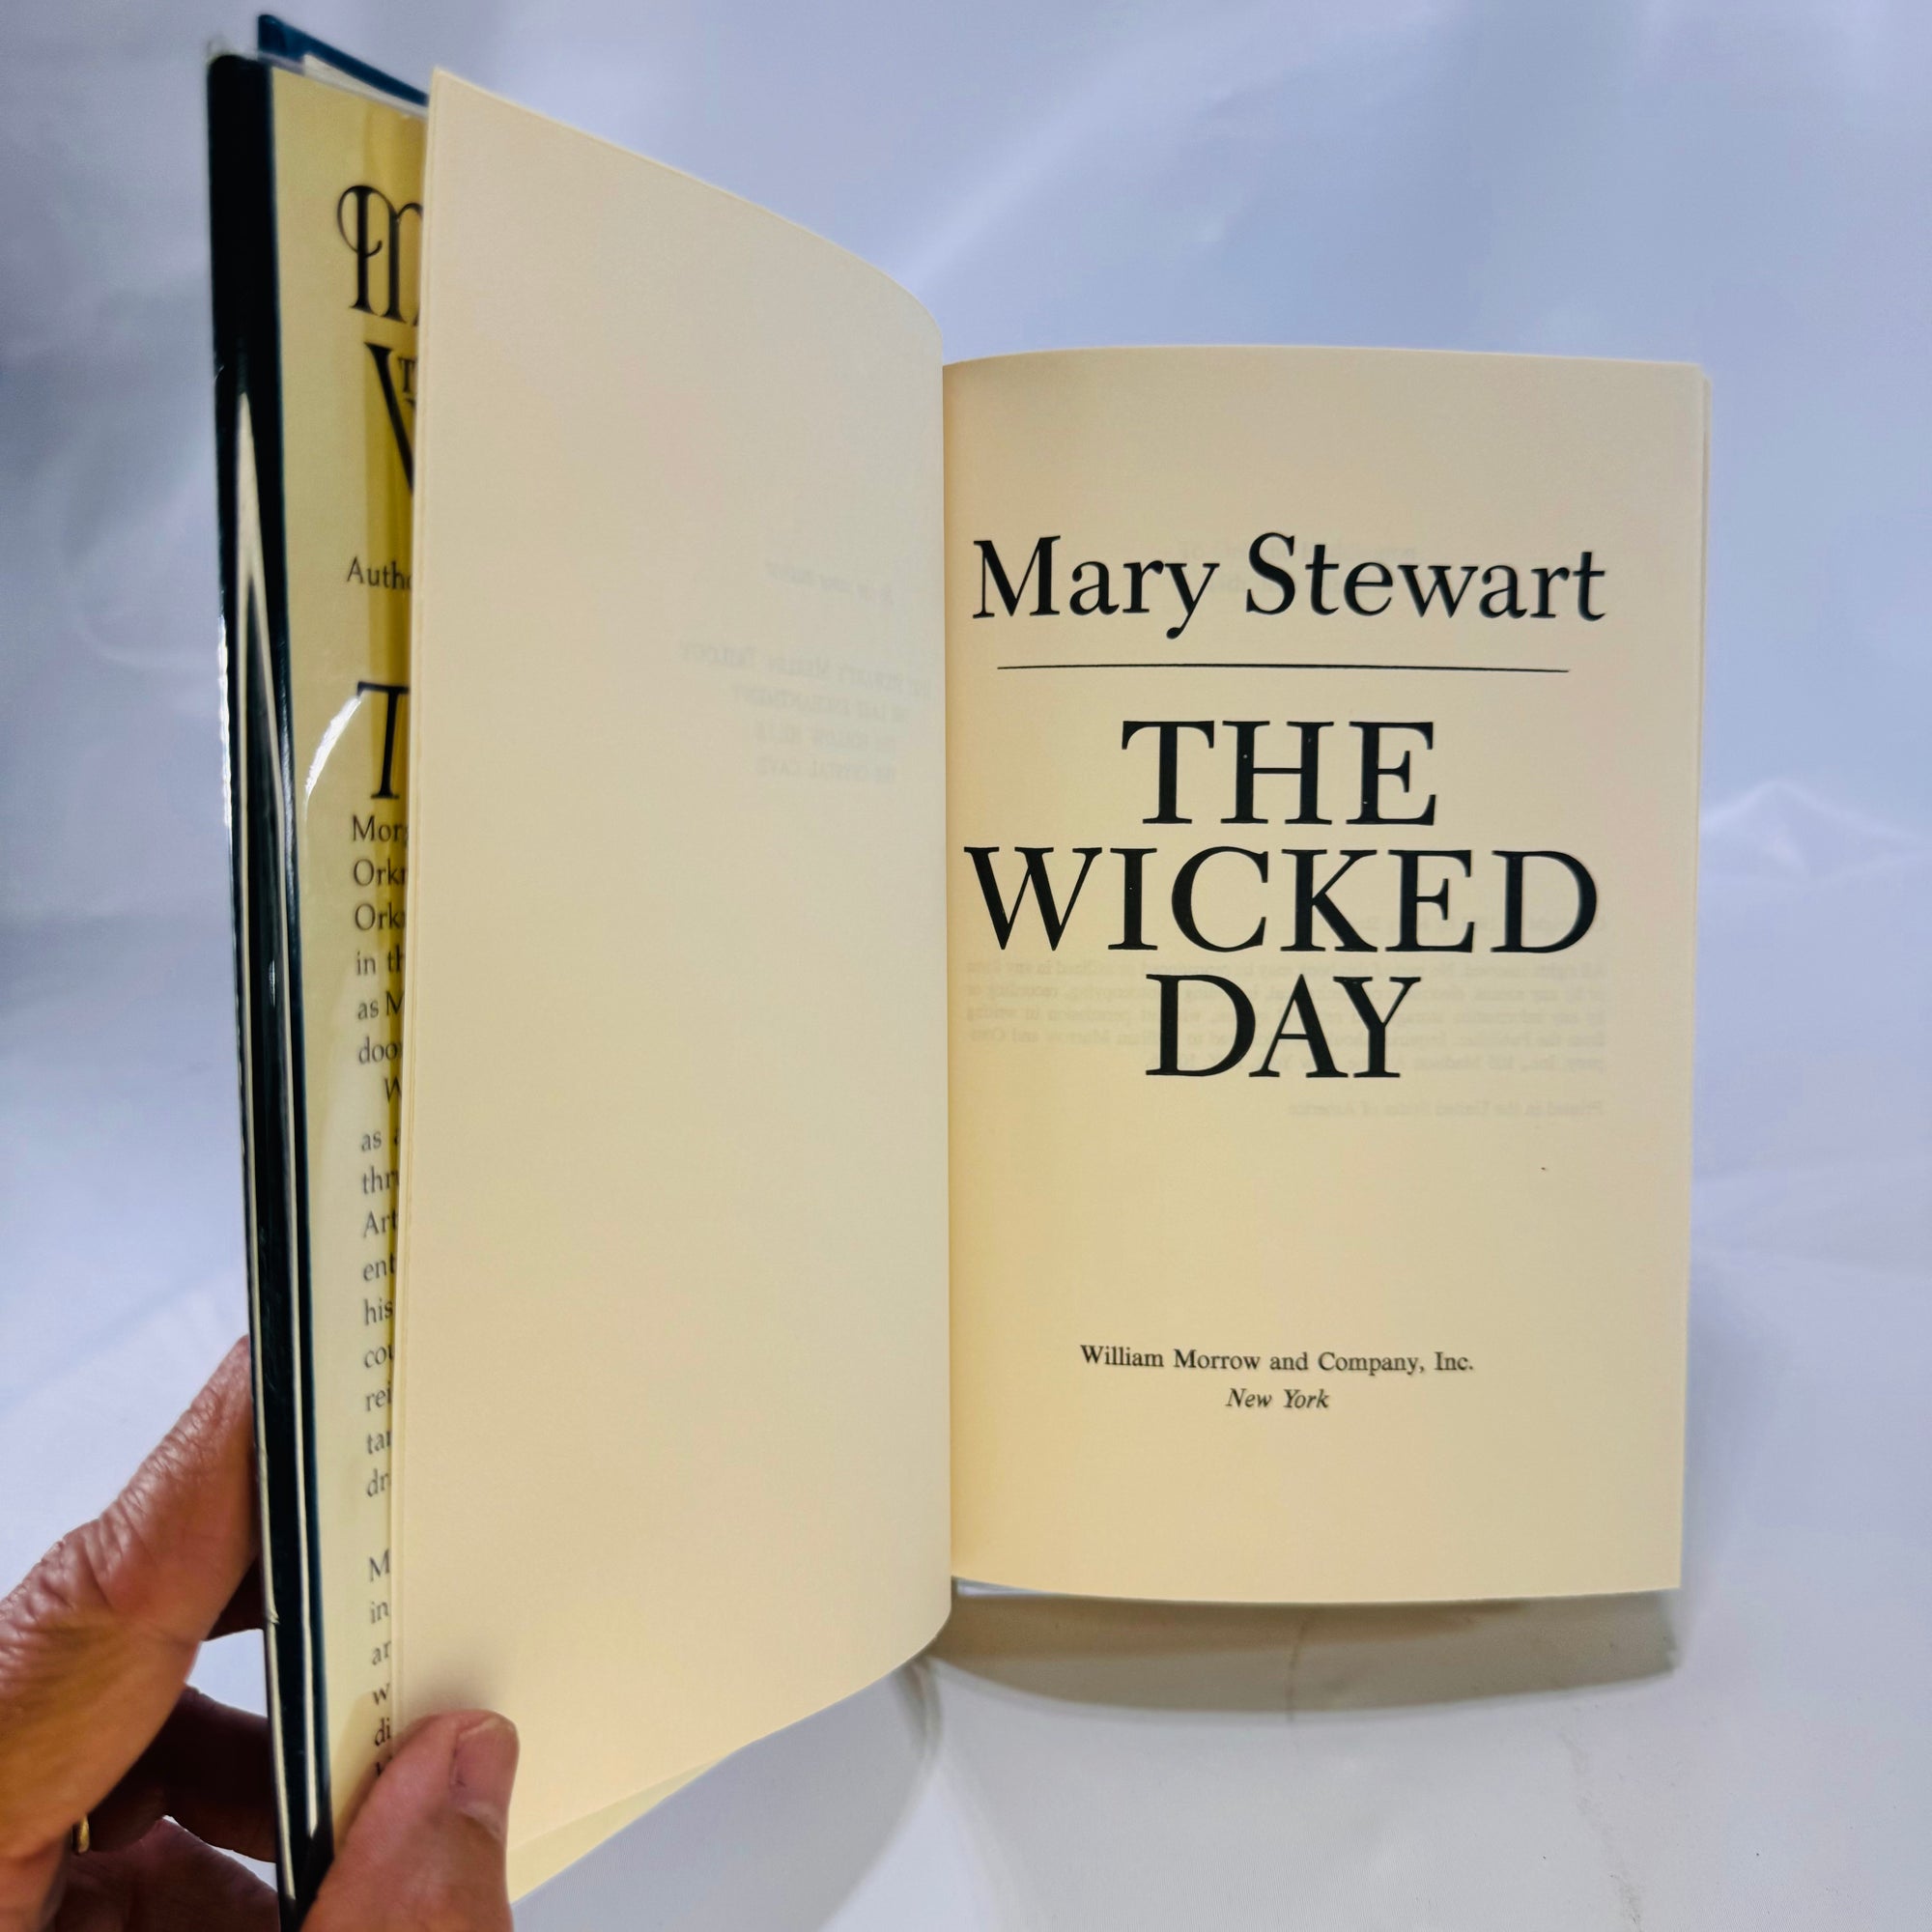 The Wicked Day by Mary Stewart 1983 William Morrow and Company